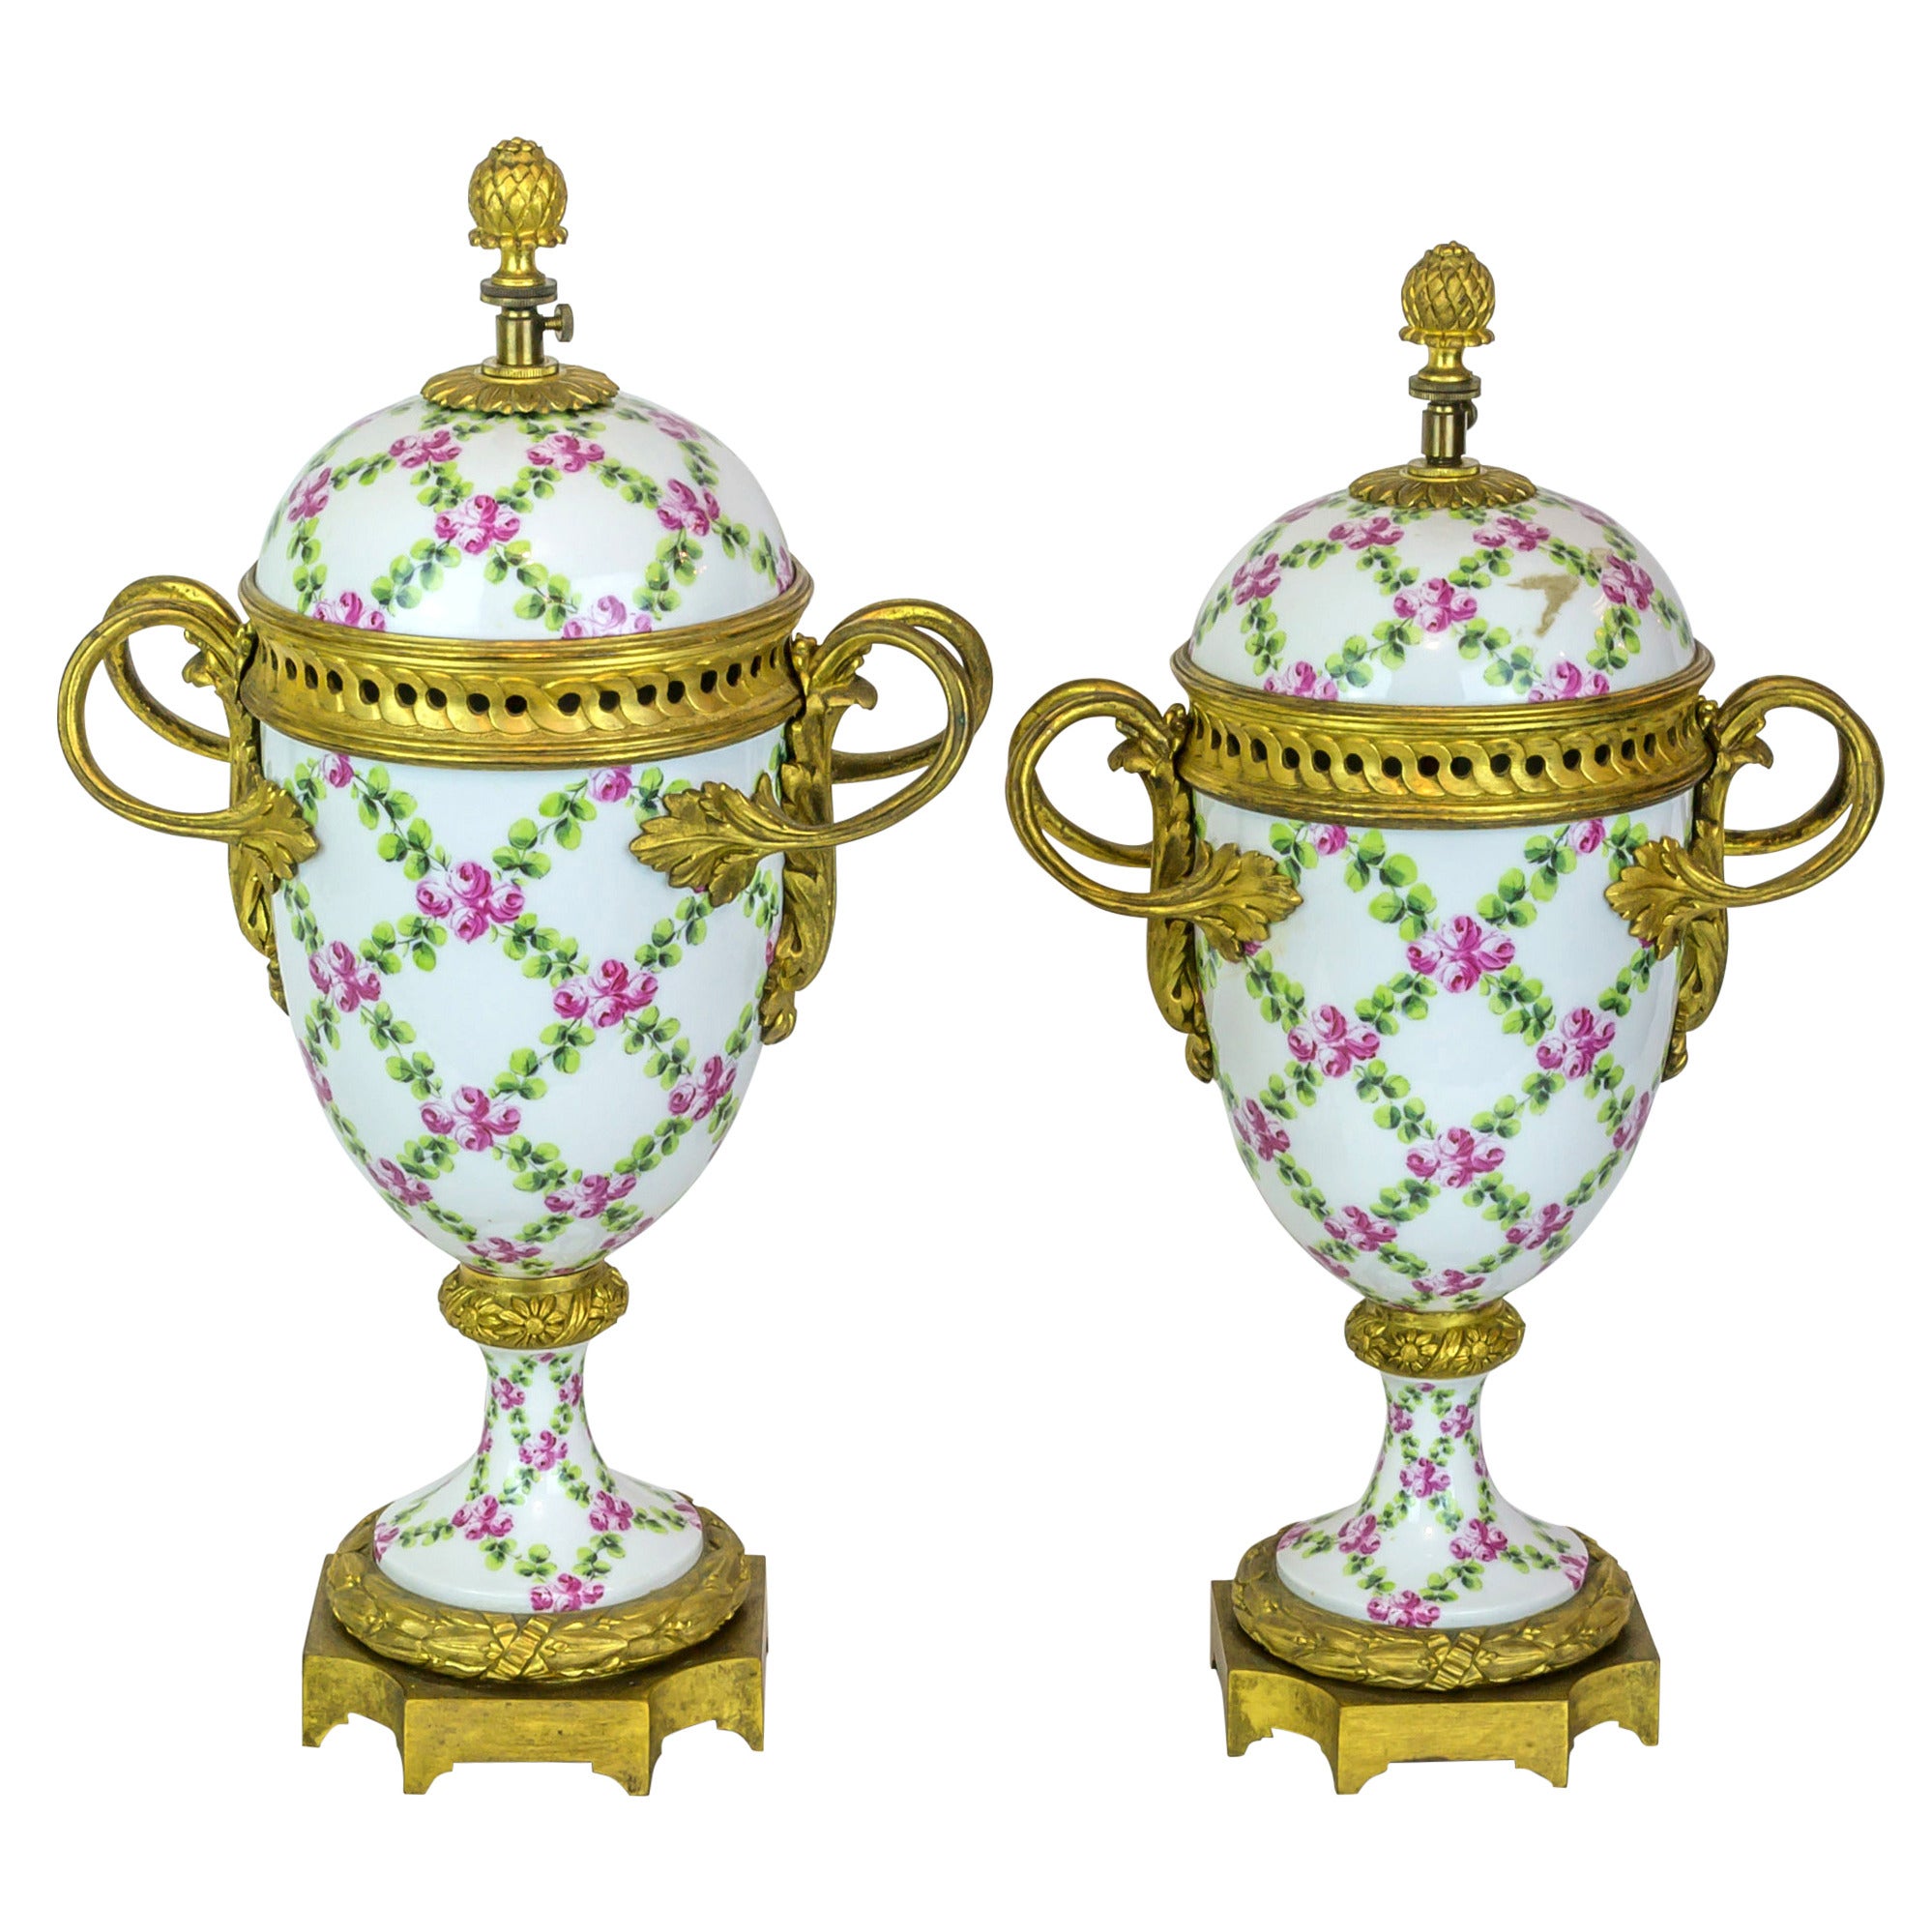 Pair of Floral Painted Porcelain and Bronze Covered Urns